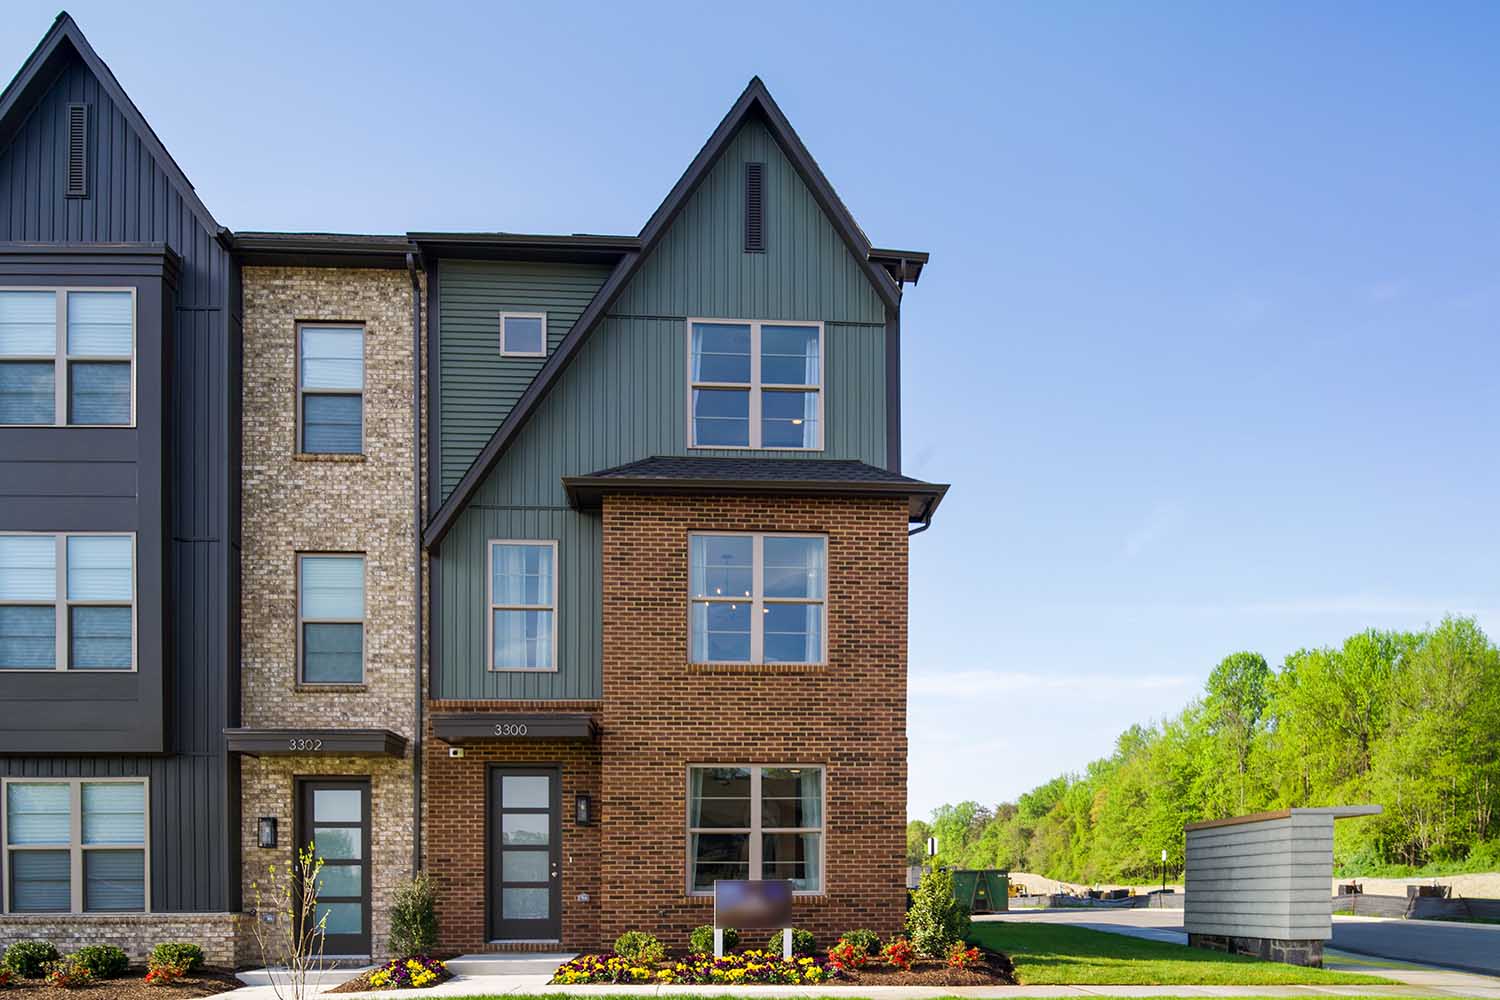 Luxury Townhomes in Laurel County, MD, Watershed by Craftmark Homes